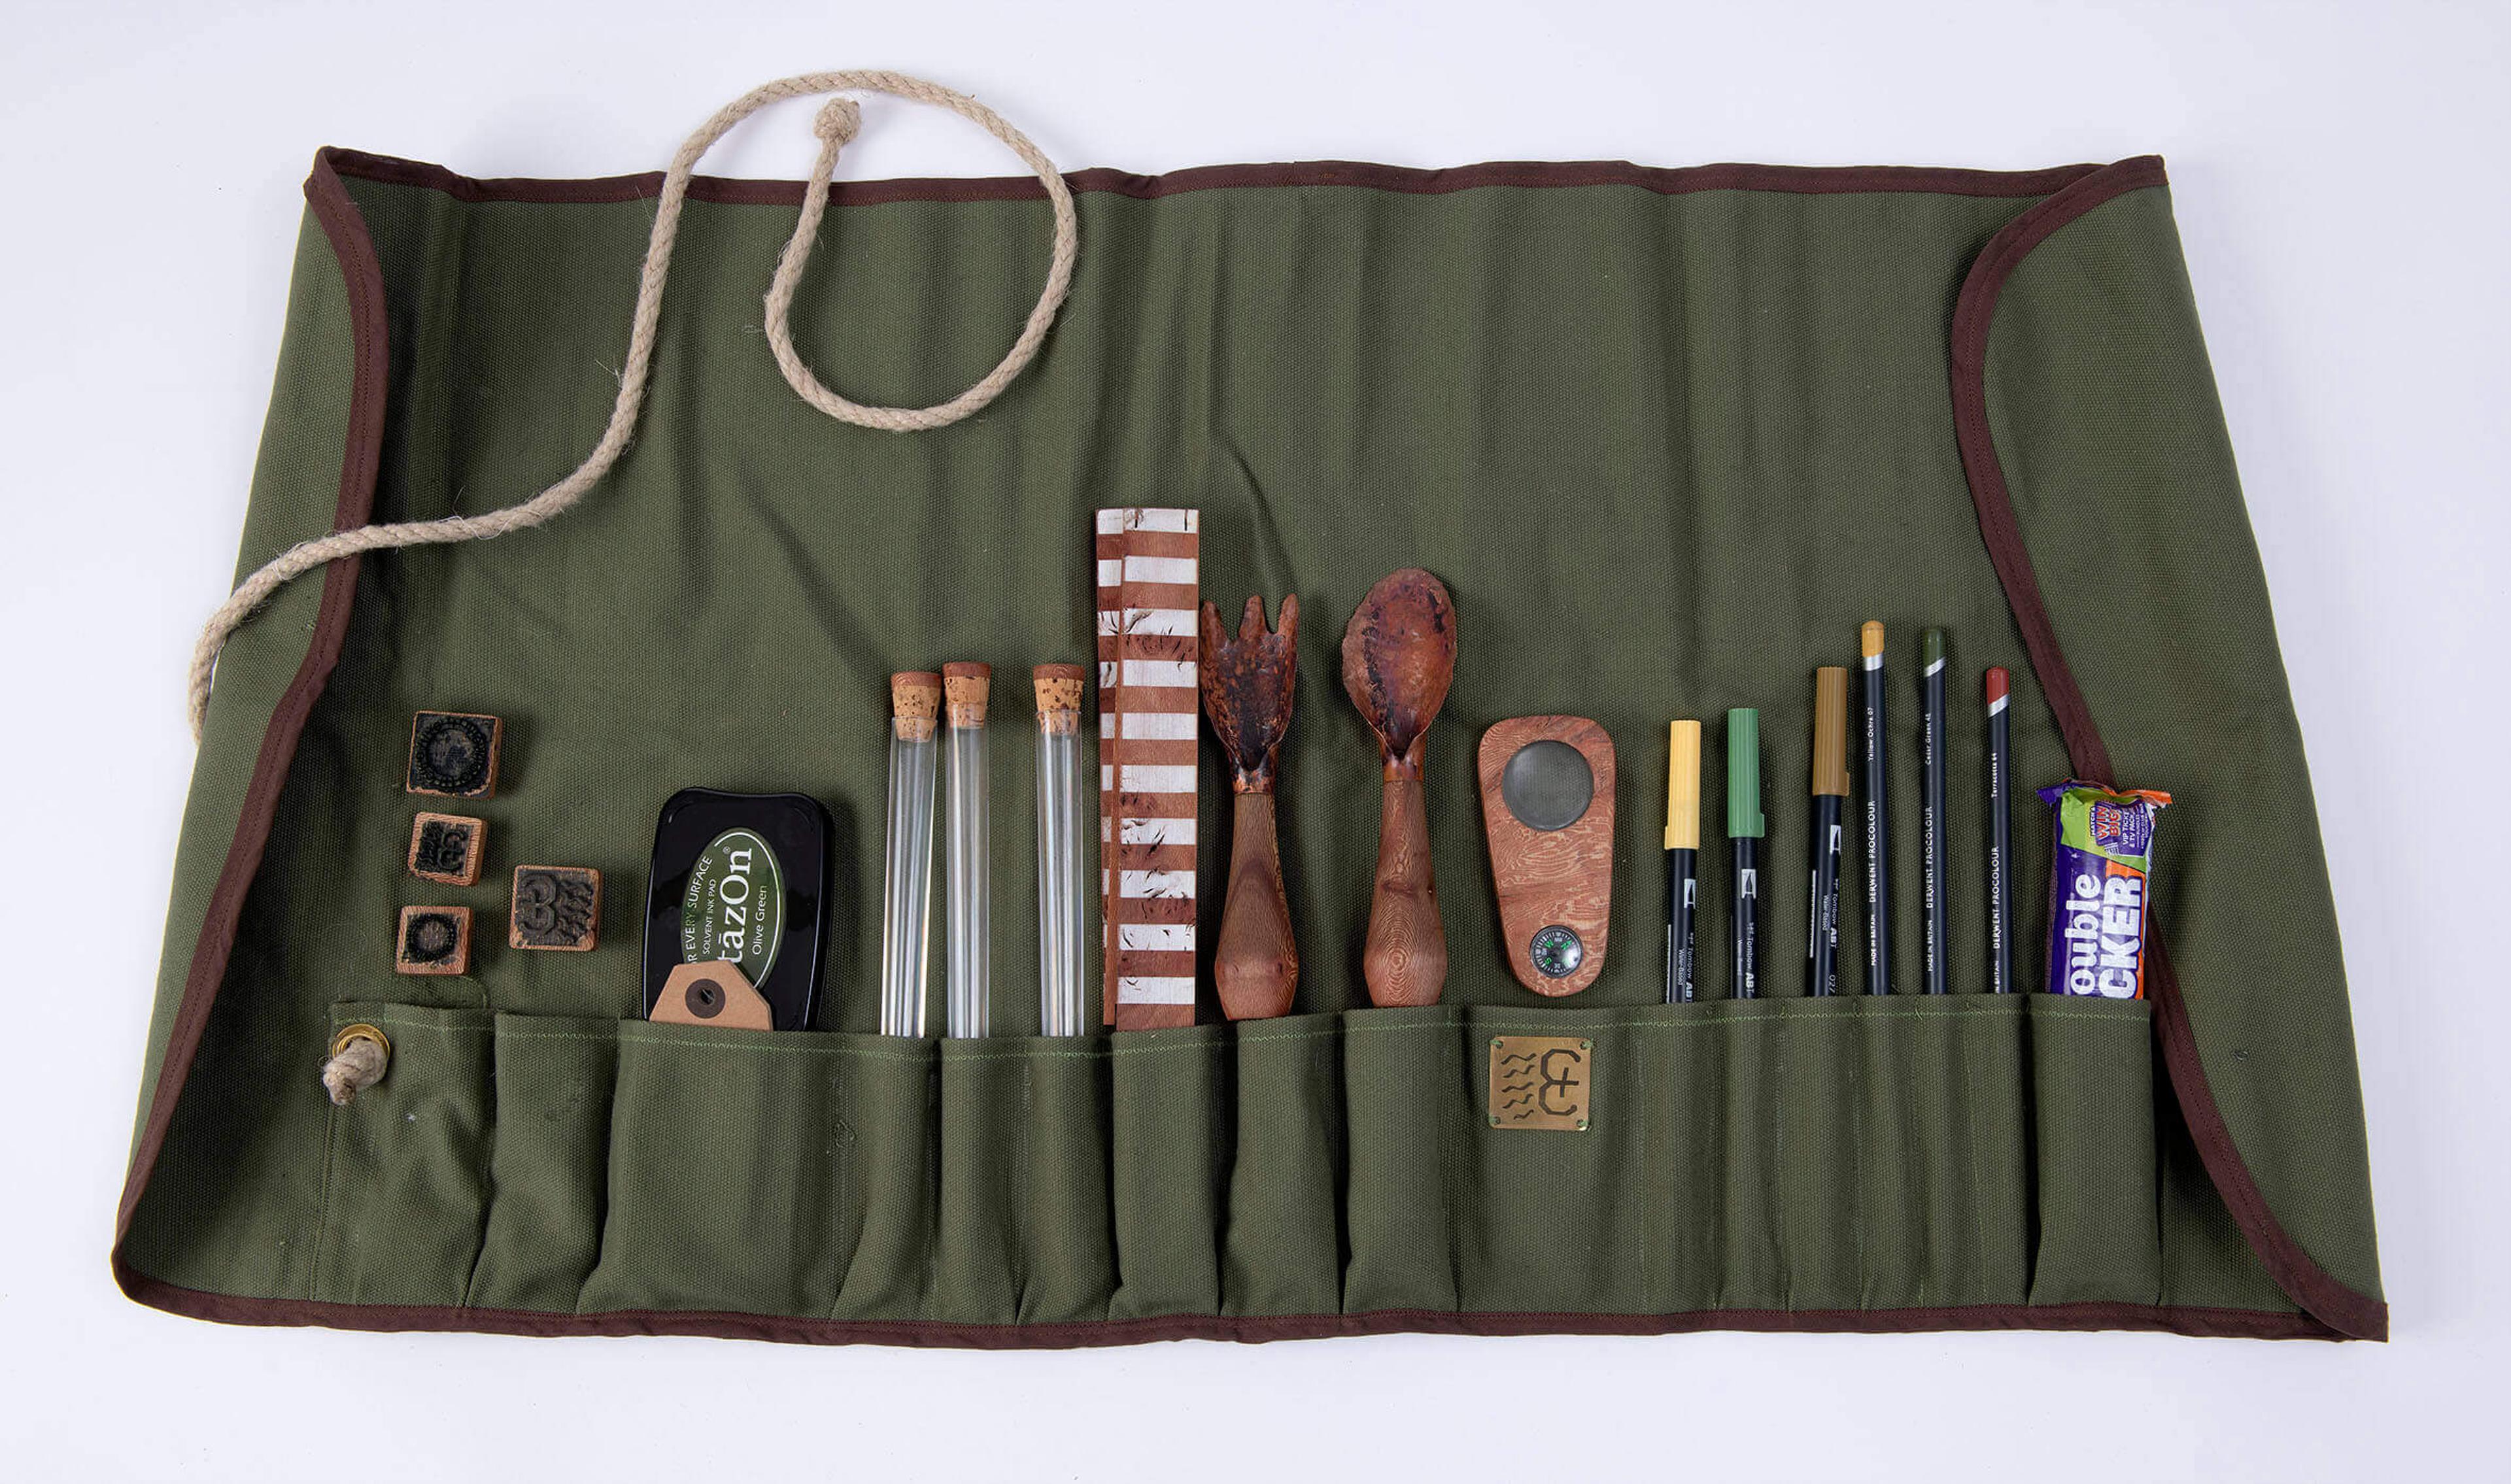 Photograph of green fabric tool roll with wooden stamps, test tubes, digging tools, a magnifying glass, a ruler, pens and a Double Decker chocolate bar